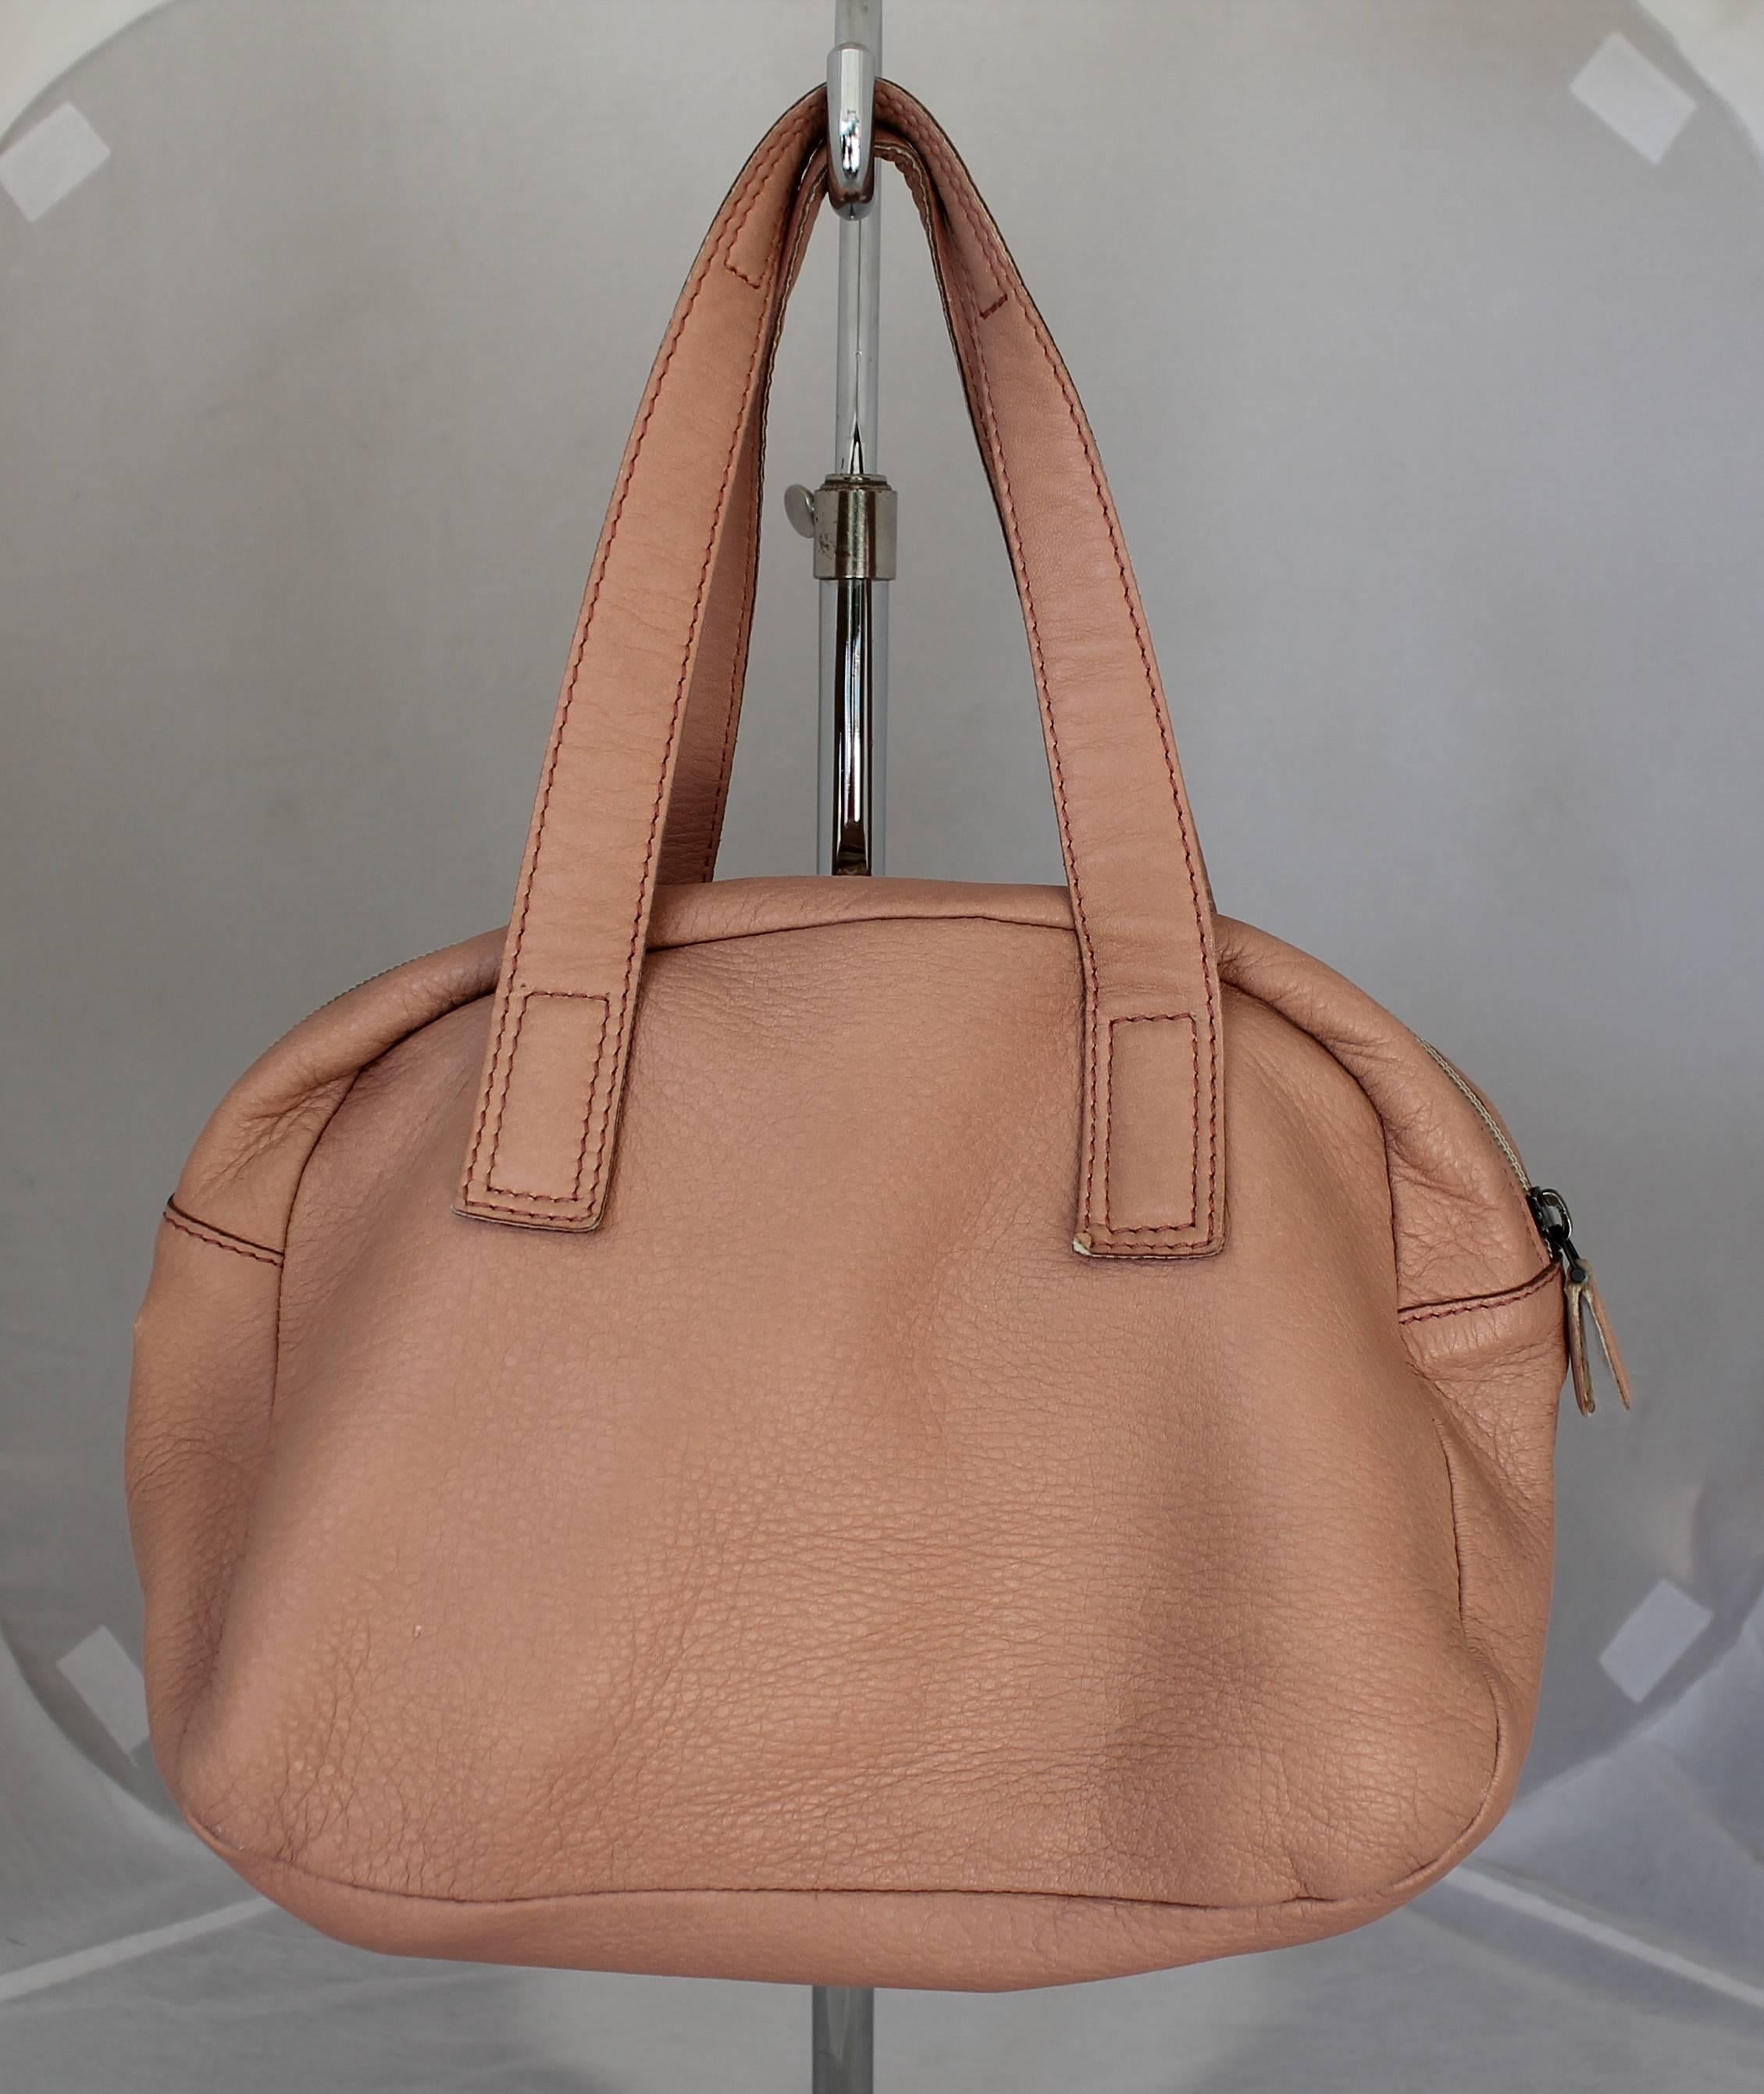 Bottega Veneta Dustry Rose Lambskin Small Shoulder Bag w/ Suede Lining.  This lovely bag is in good condition with some wear consistent with its age and a zipper that is worn.  It features a pretty dusty rose leather and suede lining.  This is a